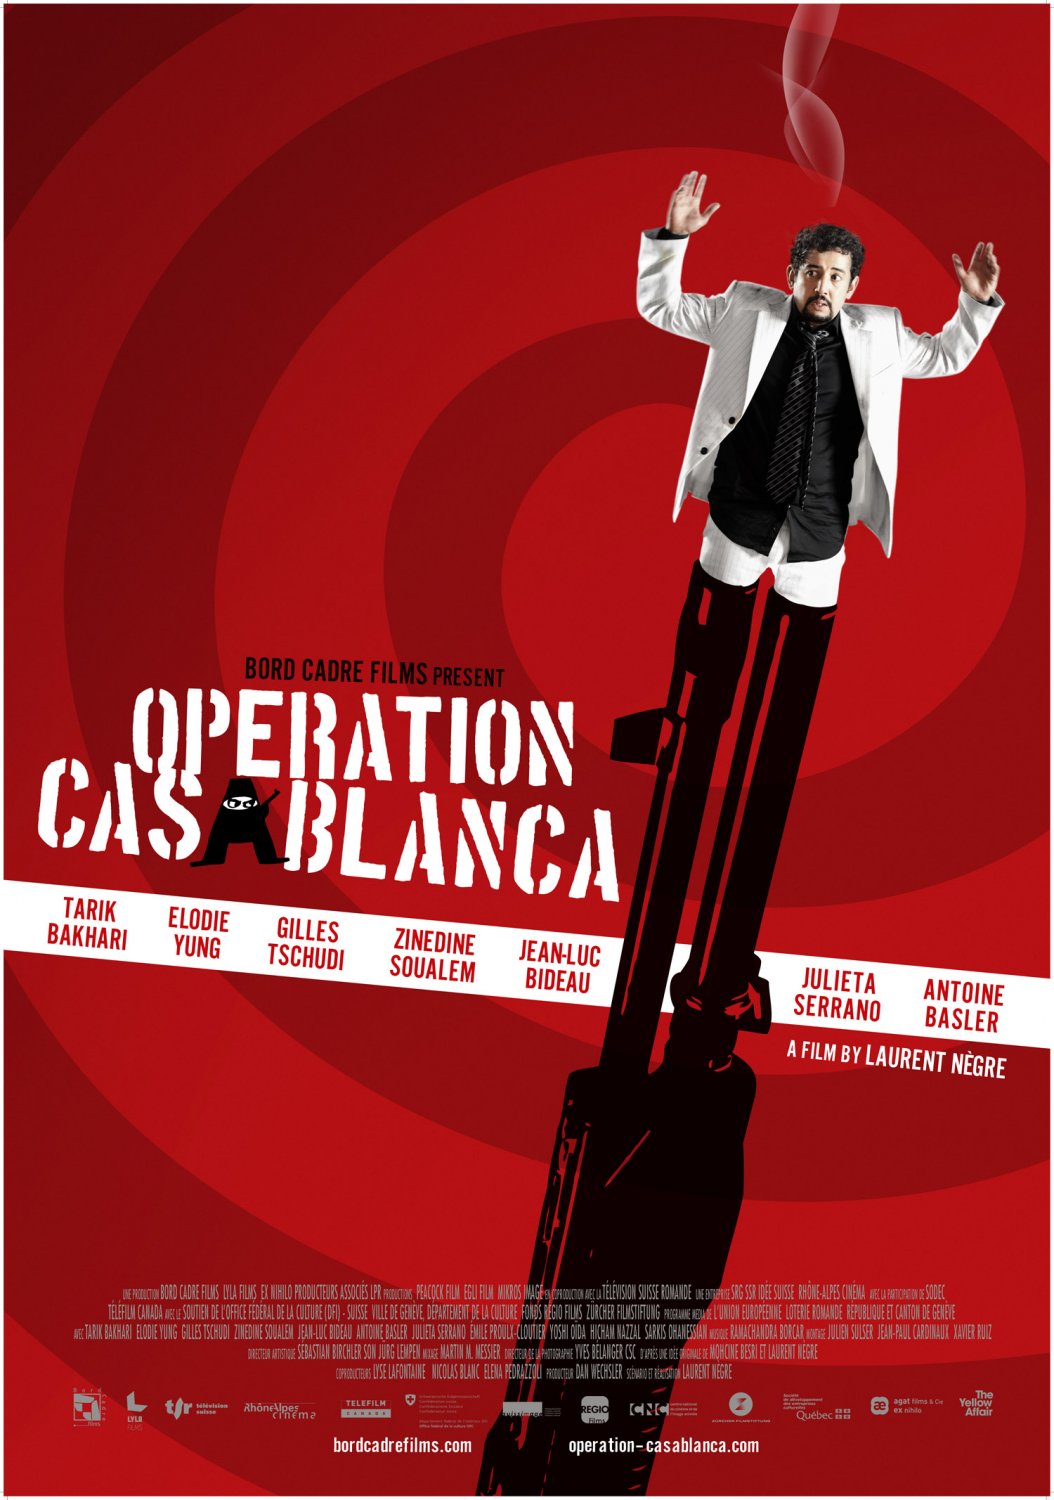 Extra Large Movie Poster Image for Opération Casablanca 